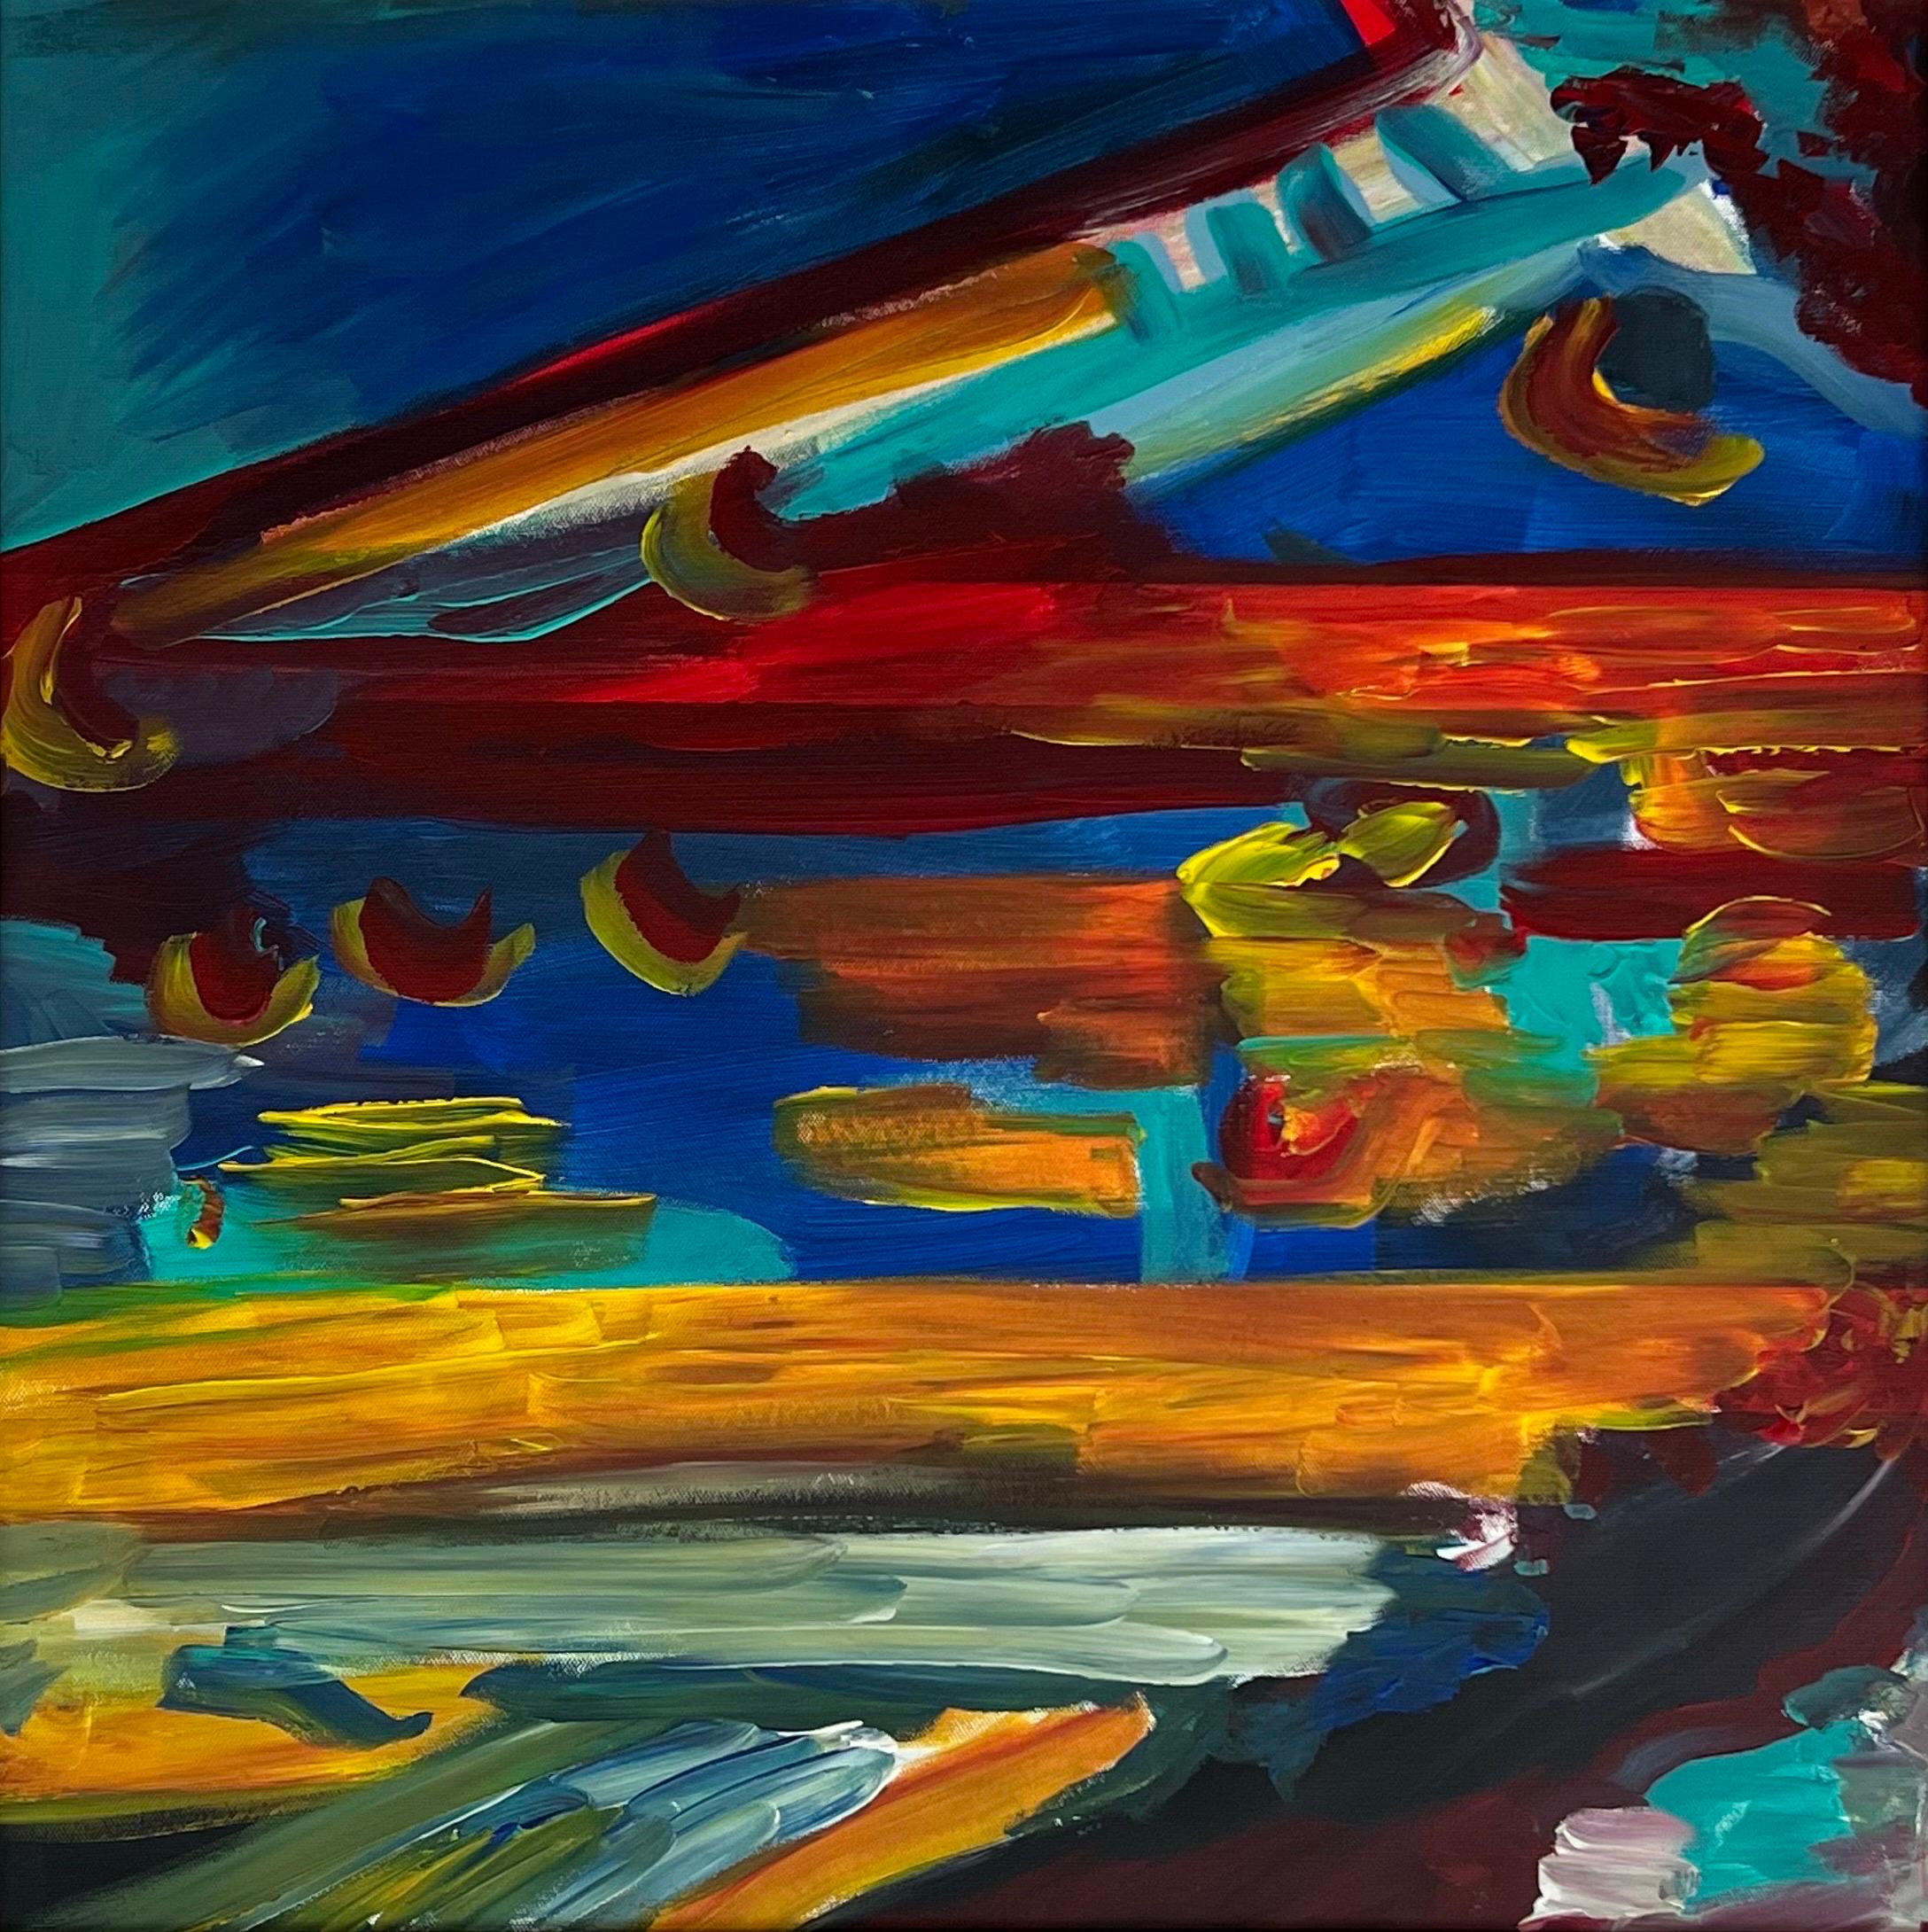 Colourful Psychedelic Abstract Landscape Painting of Urban City Scene by leading British Urban Artist Angela Wakefield.

This artwork is from an intense body of abstract work that formed the very foundations of her output as a professional artist.